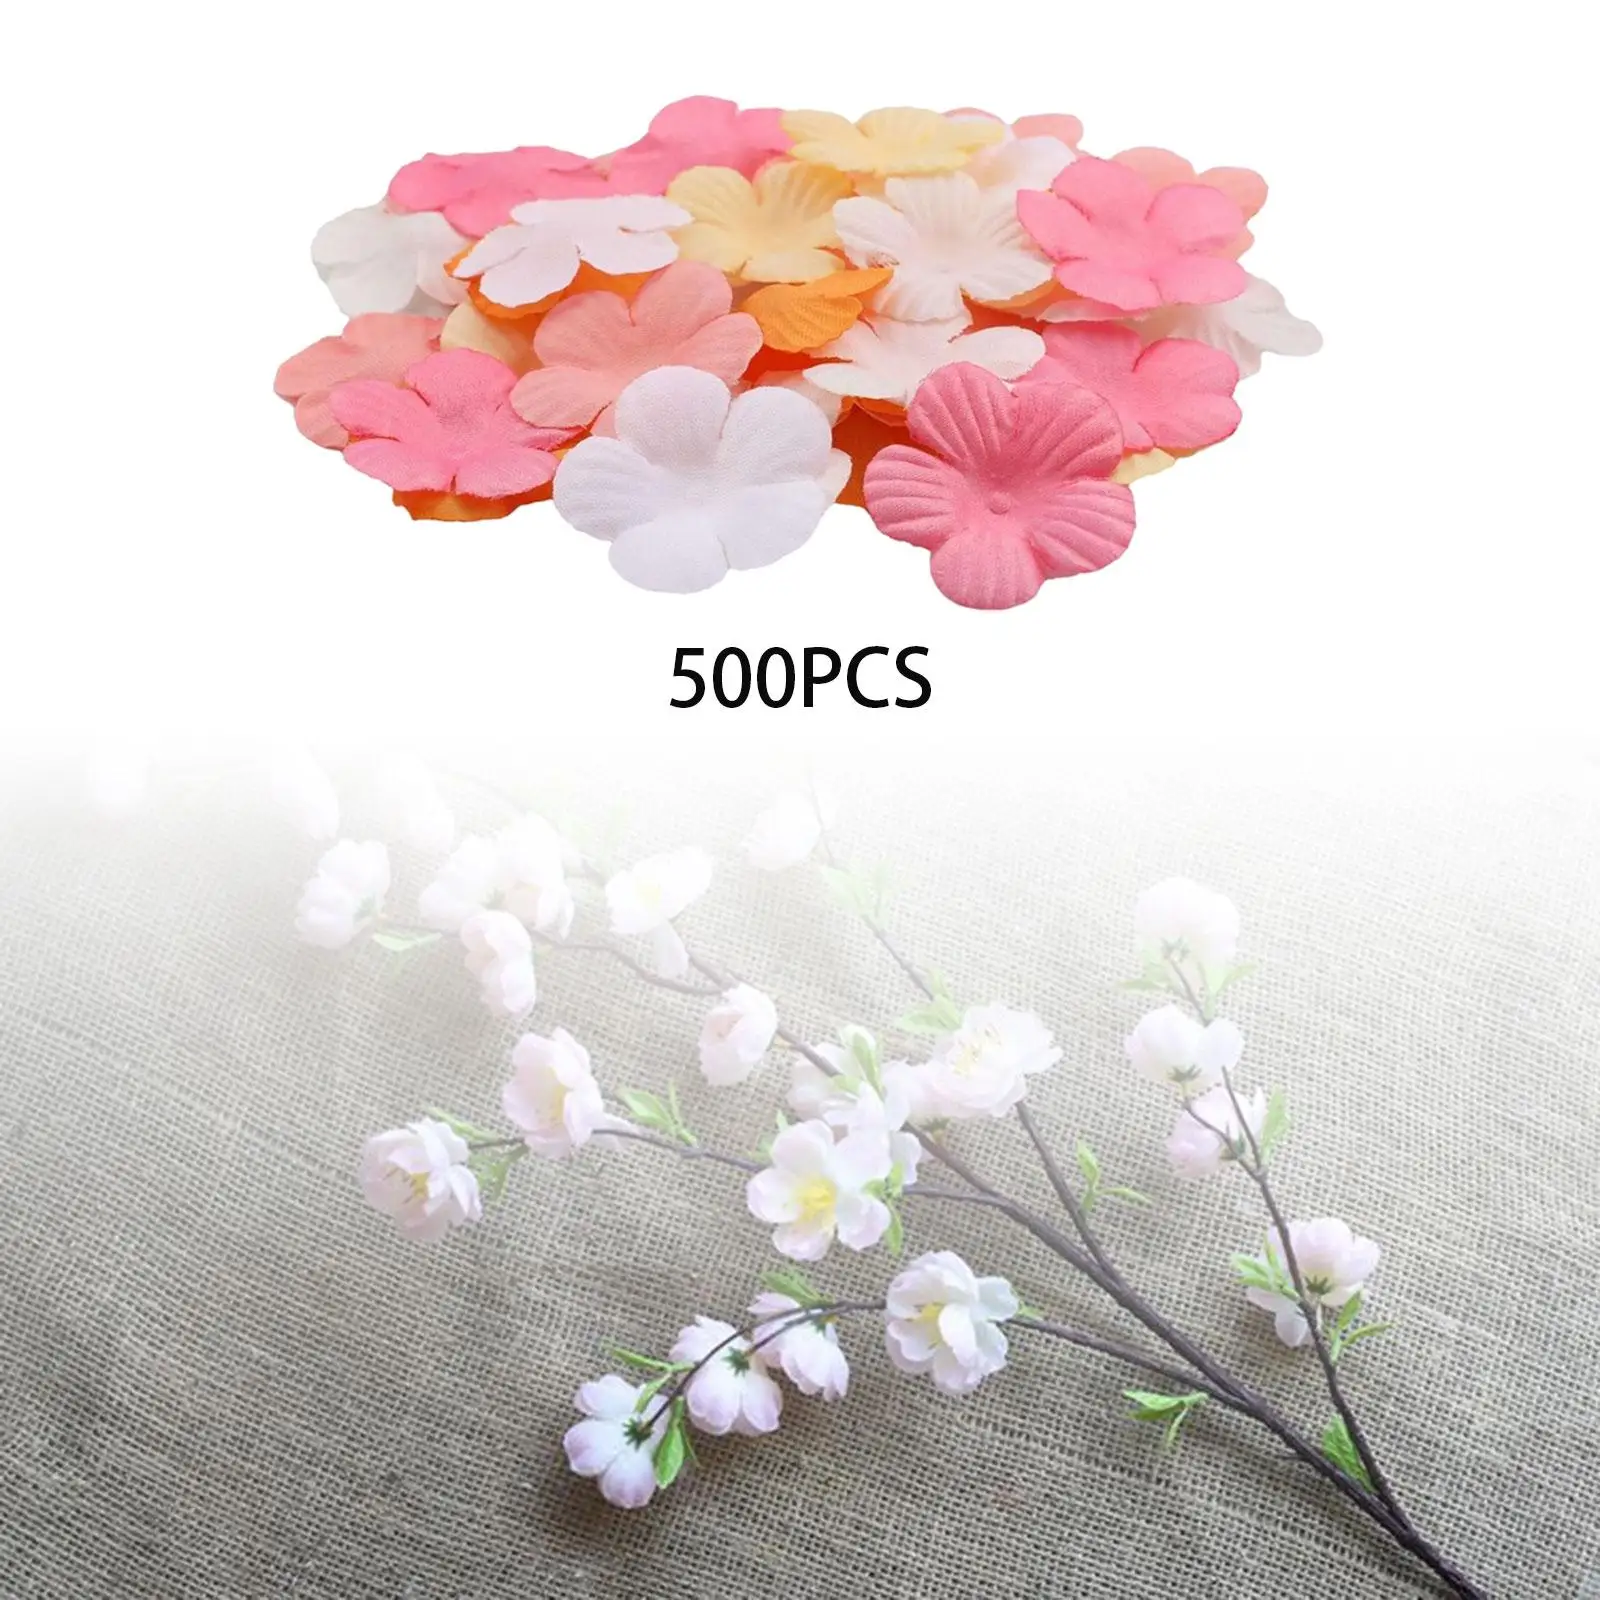 Cherry Blossom Petals 3cm 500 Pieces Plum Blossom Fake Flower Petals for Wreath Garden Indoor Outdoor Party Decorations Table